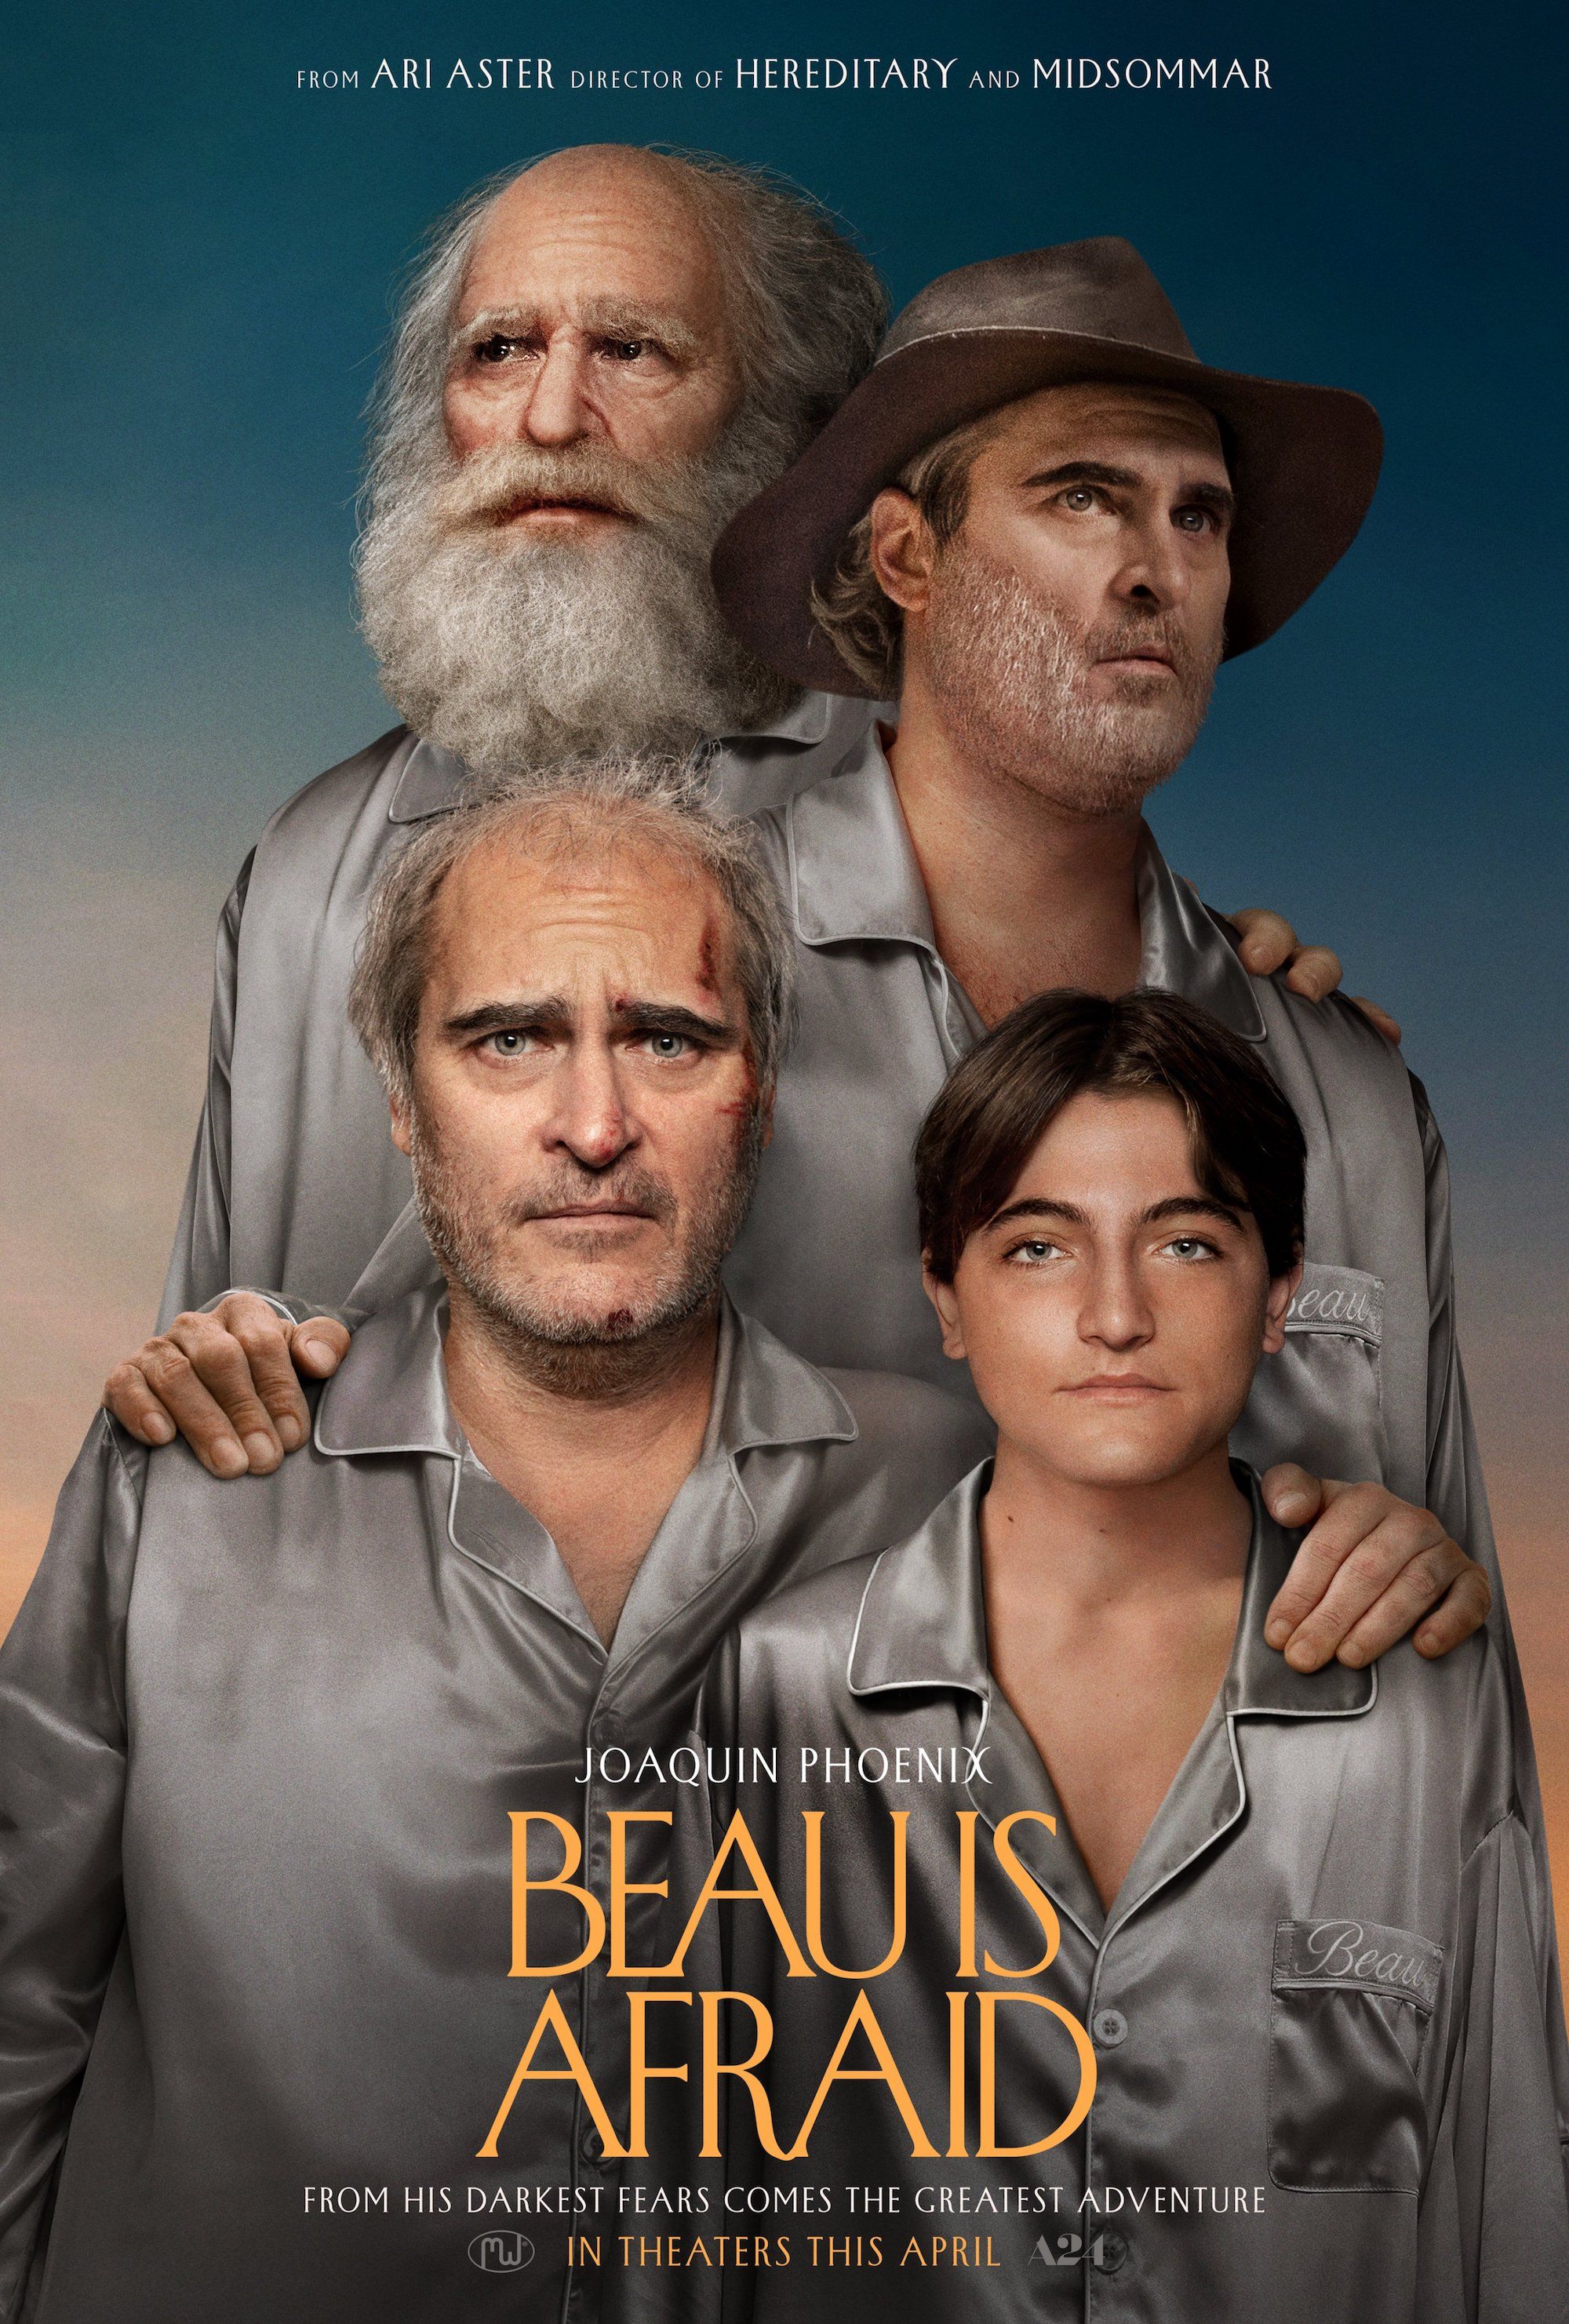 Joaquin Phoenix Ages From Young Boy To Old Man In Beau Is Afraid Poster